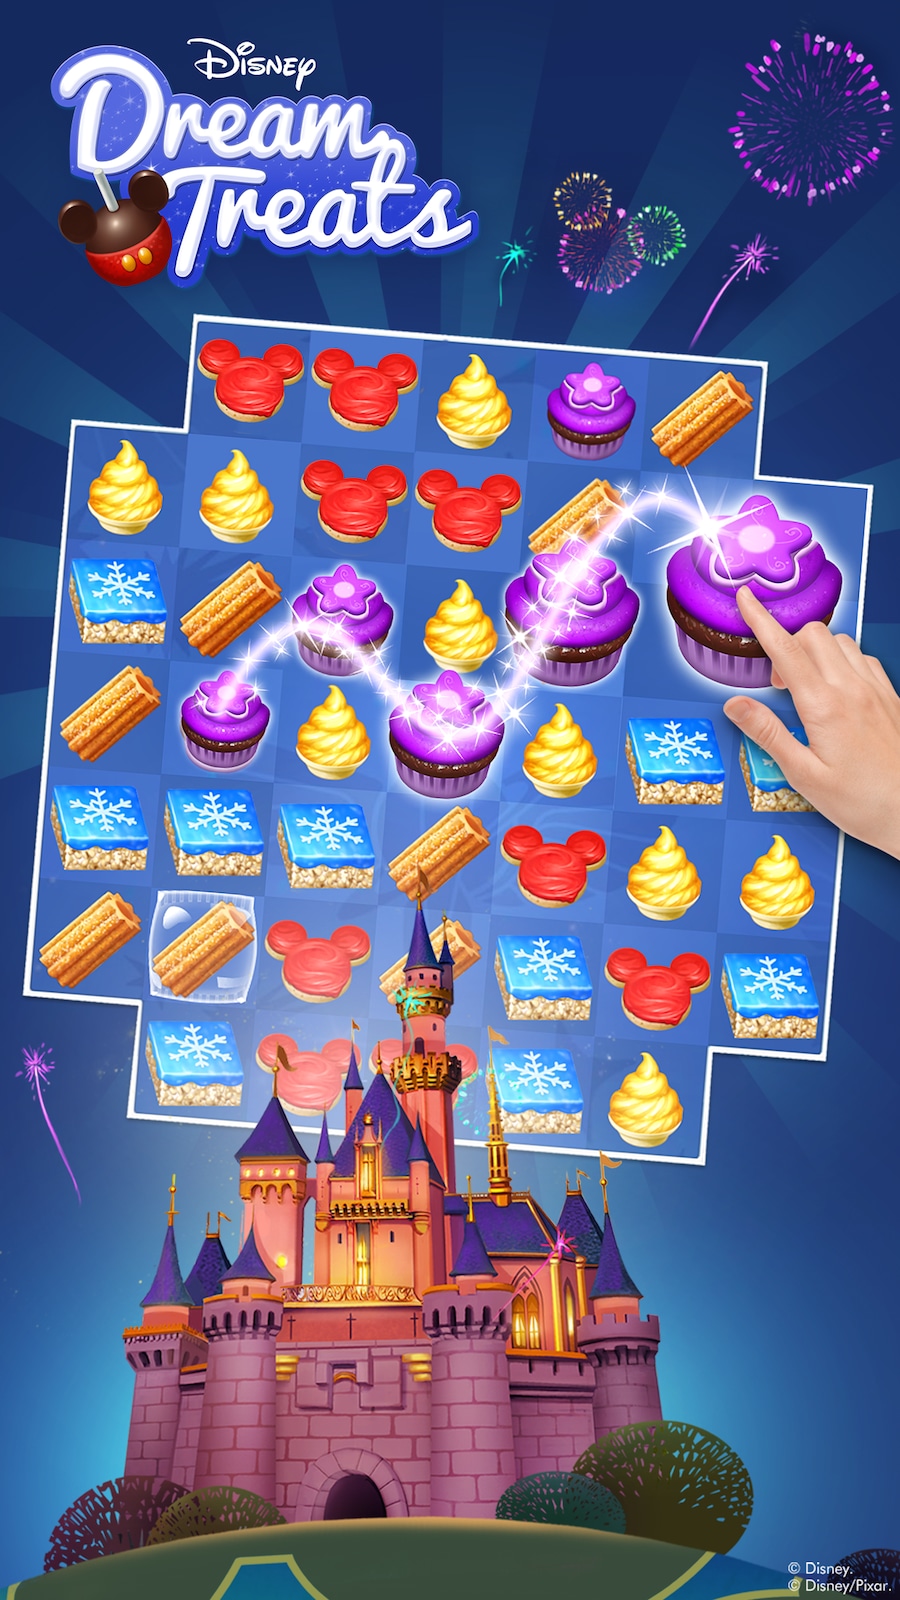 New Disney Dream Treats Puzzle Game Available for Download Now